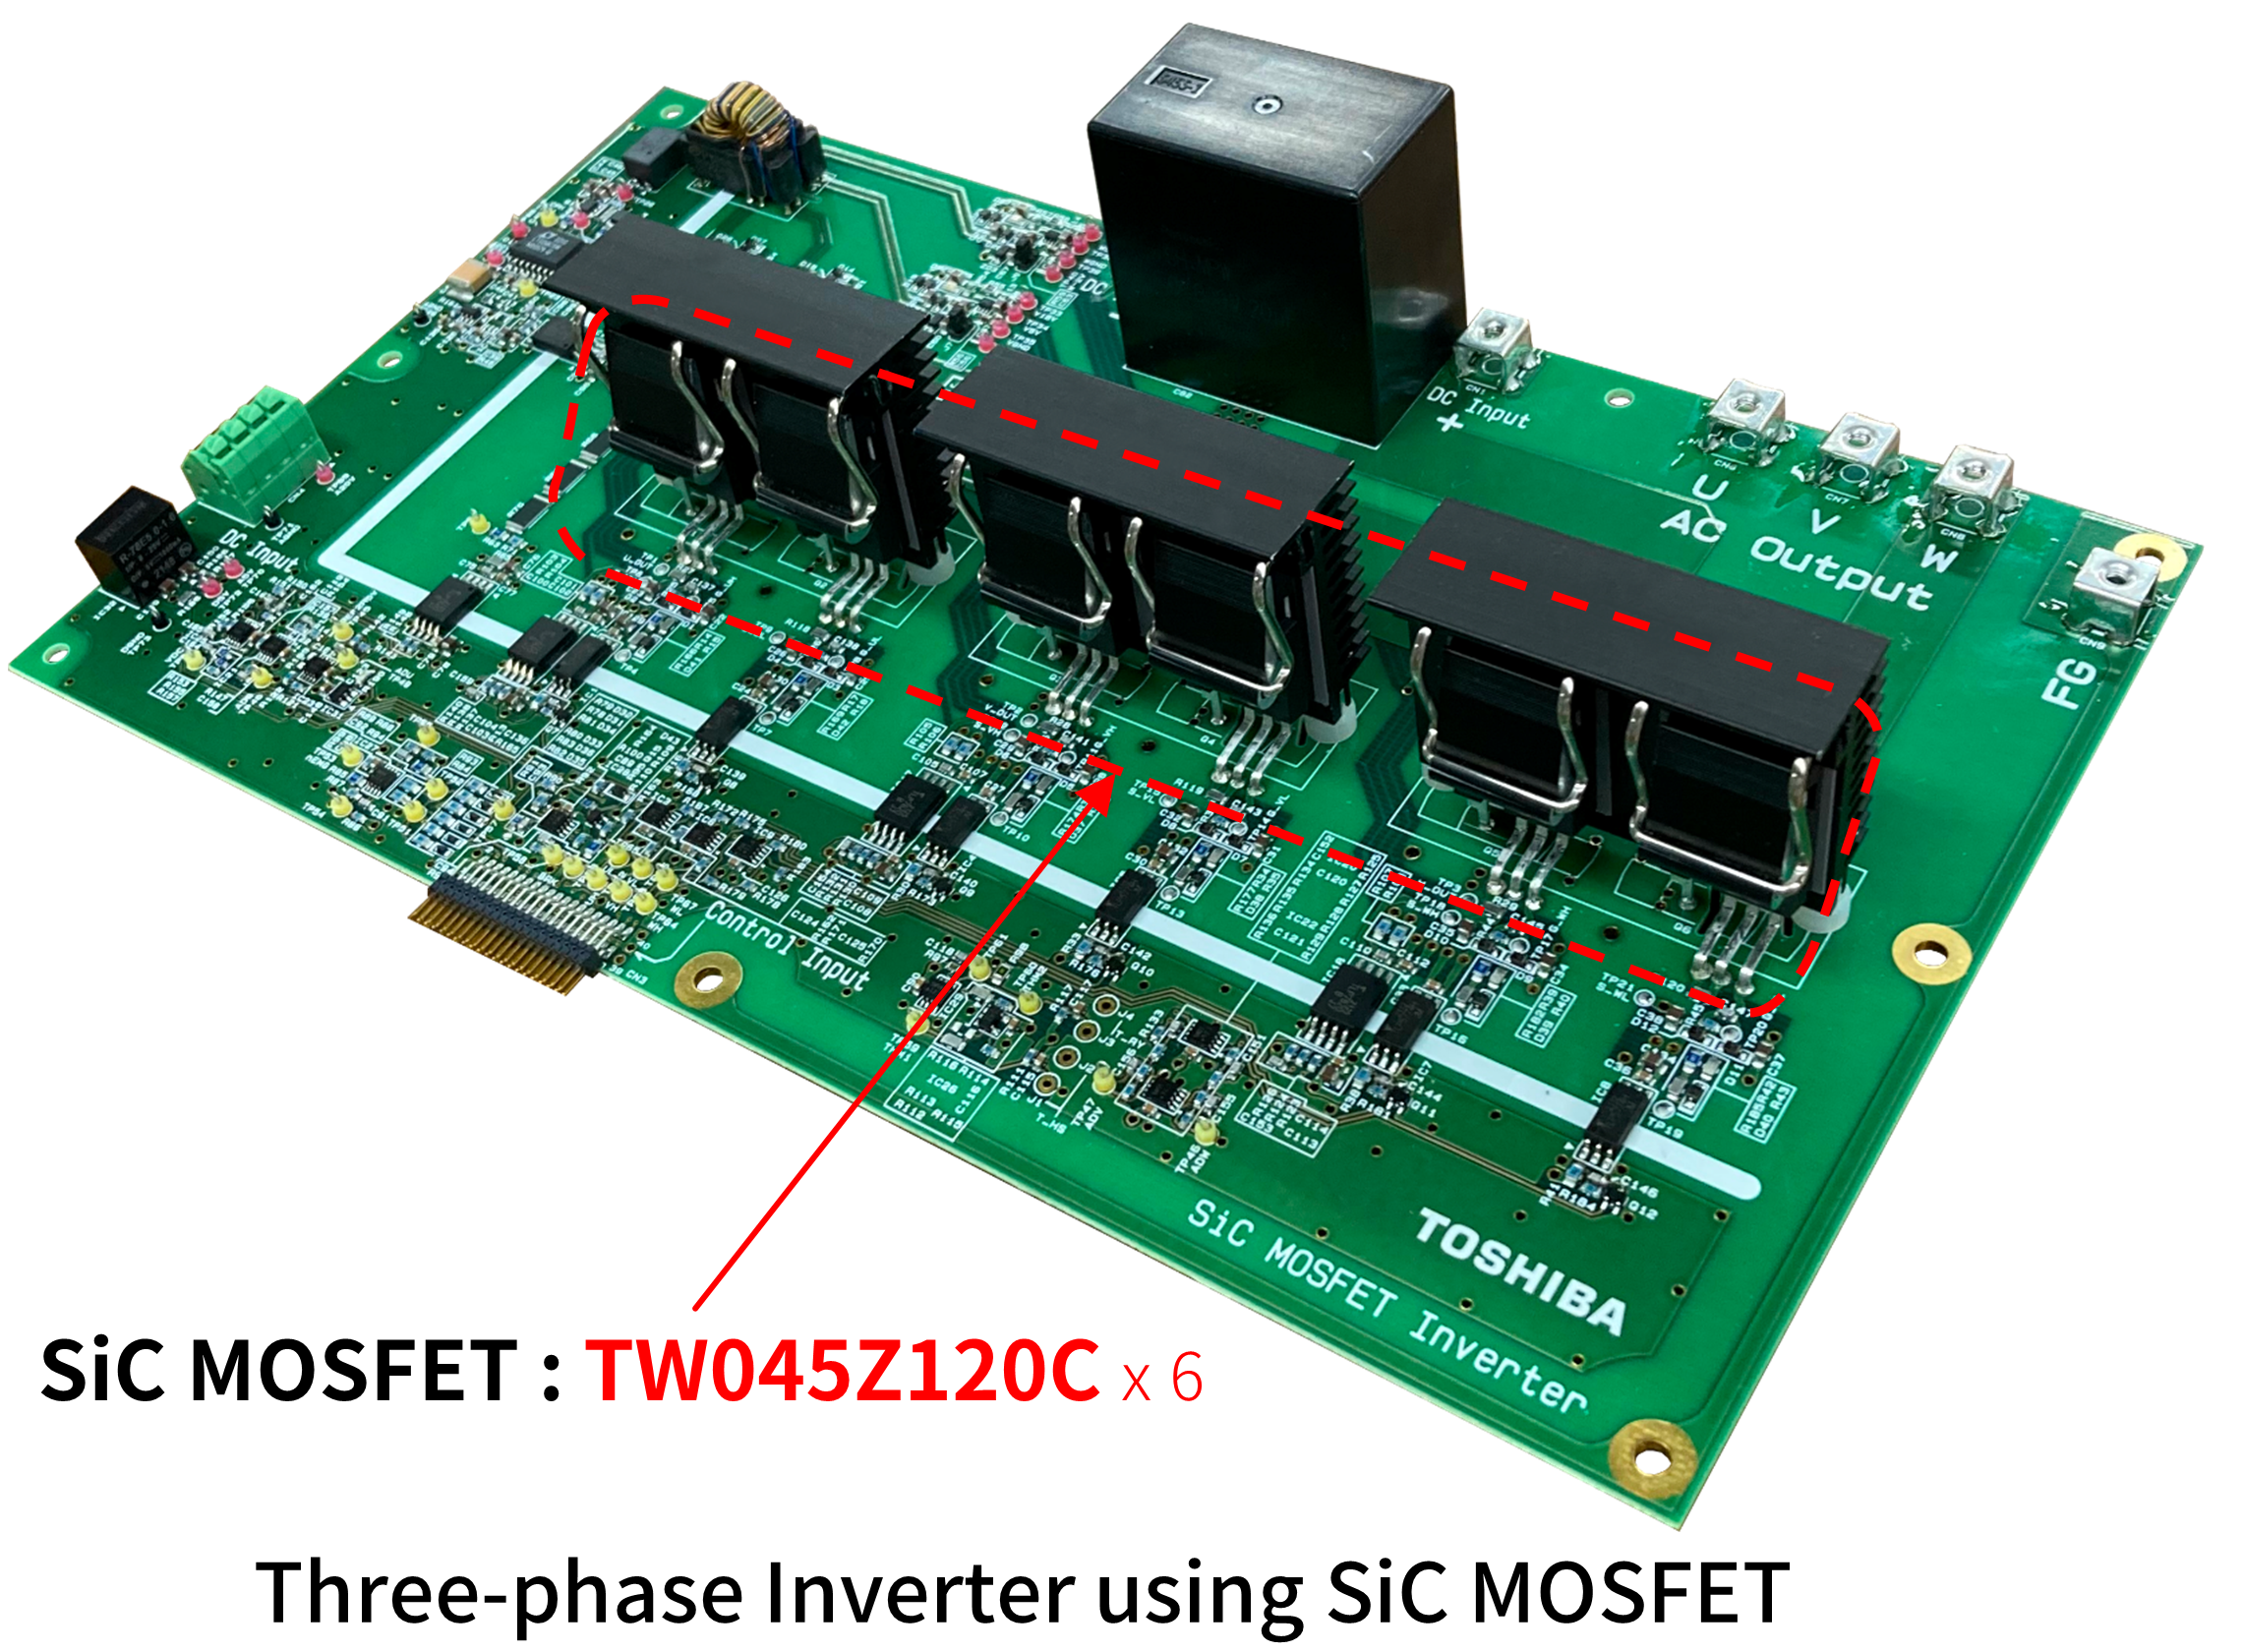 Three-phase inverter using SiC MOSFETs